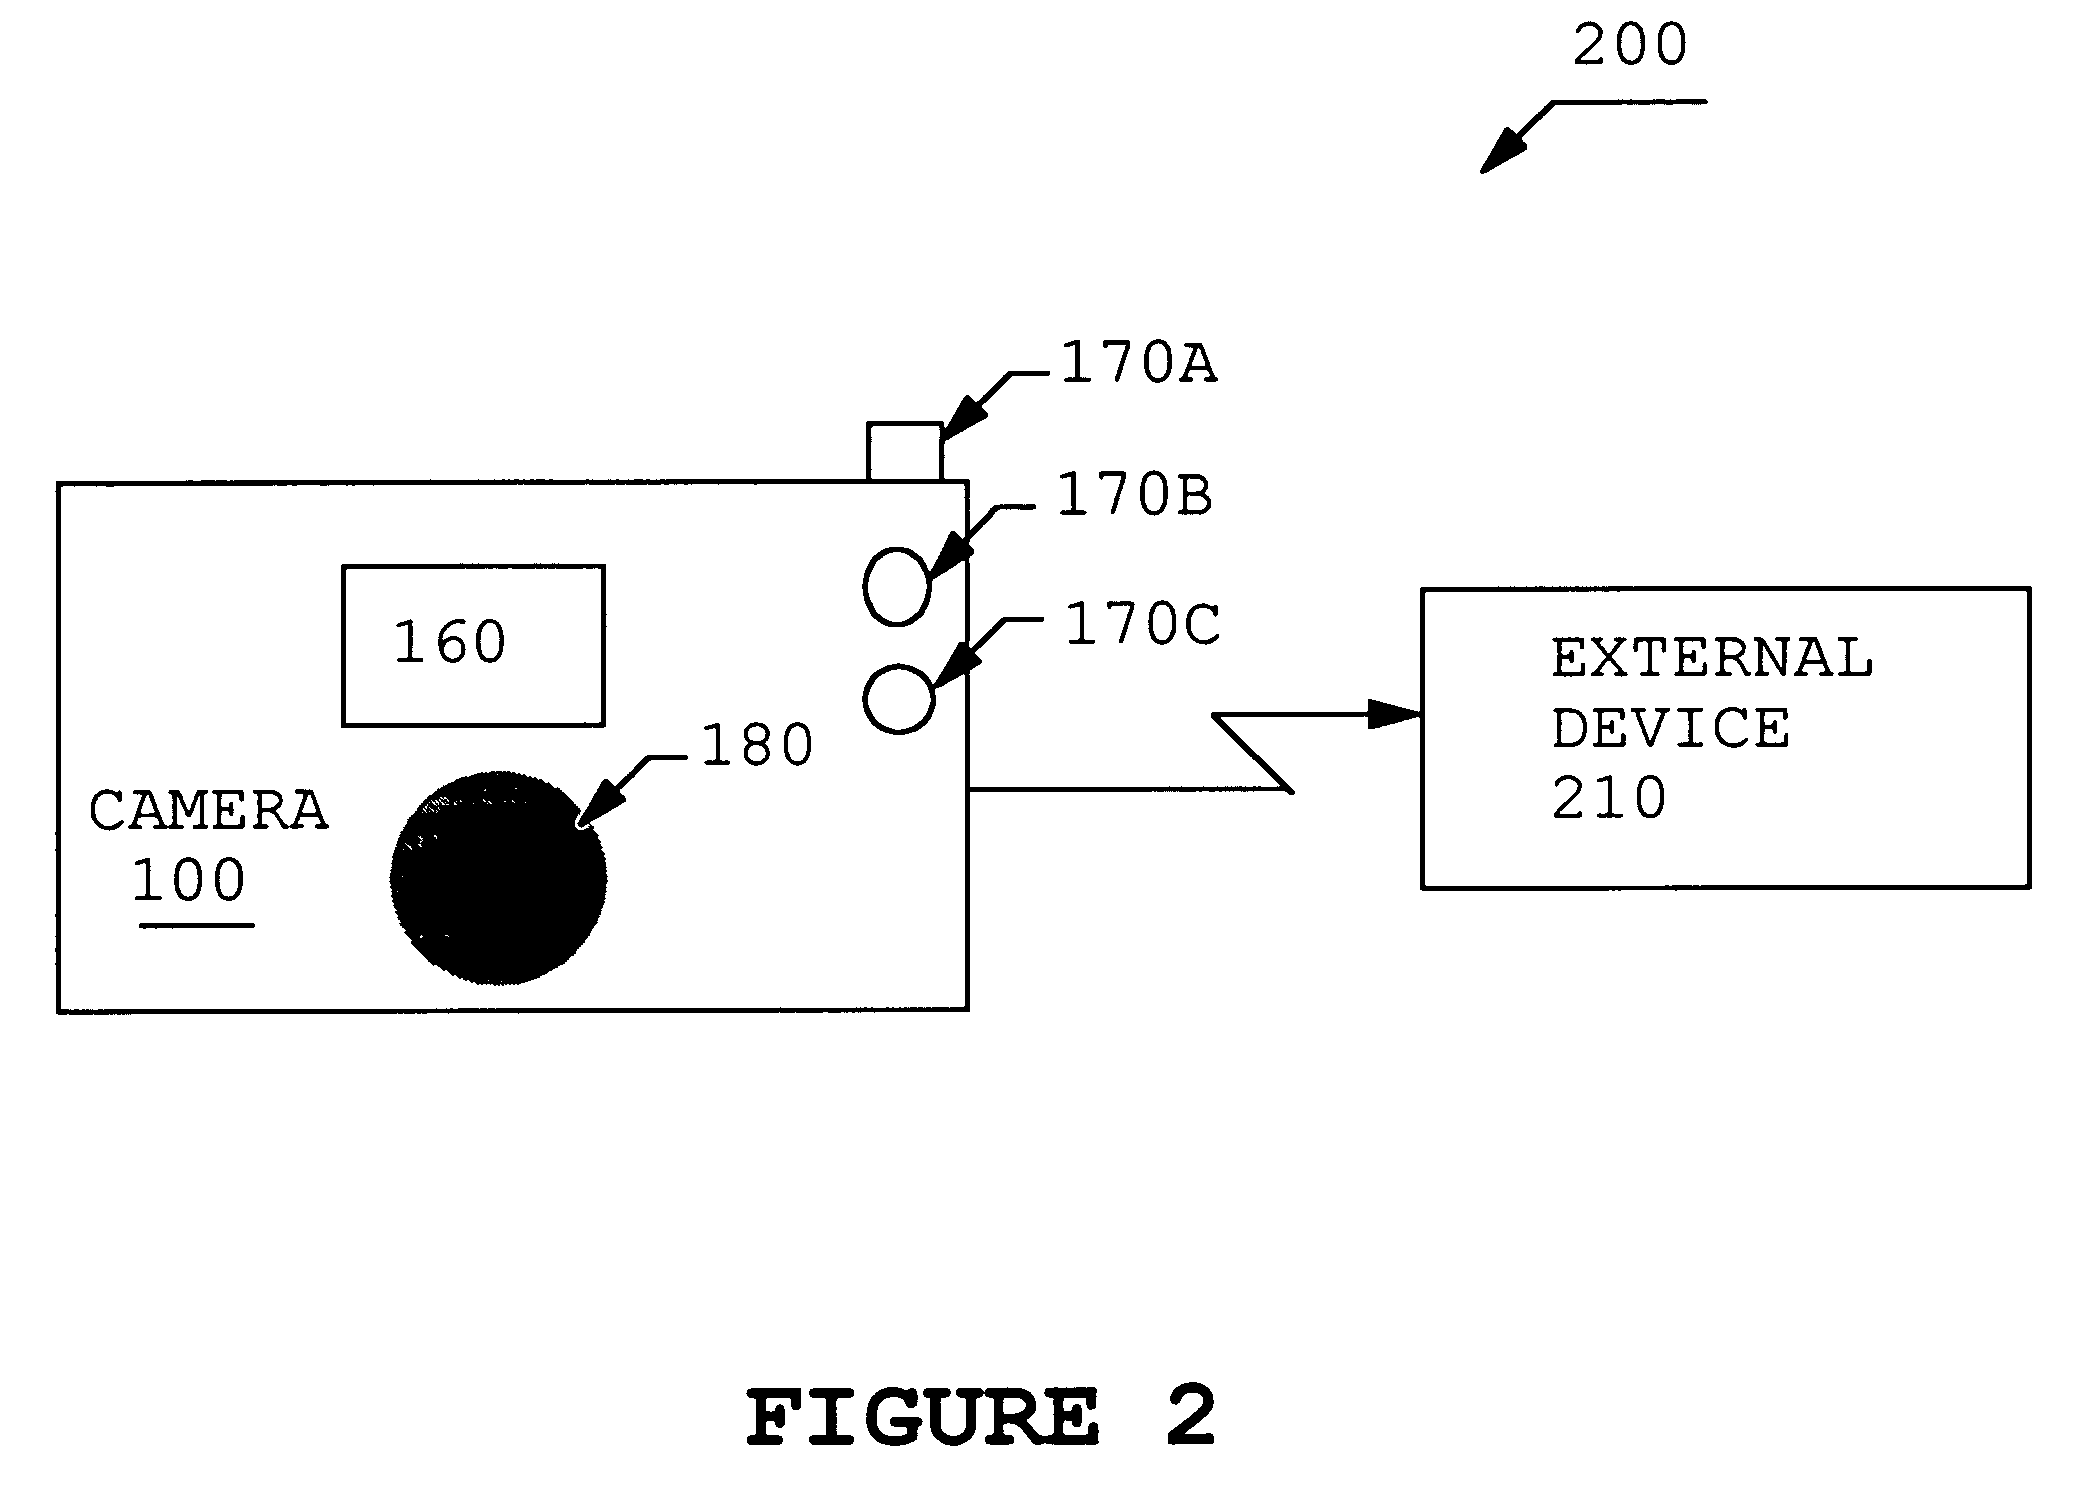 Pointing device for digital camera display